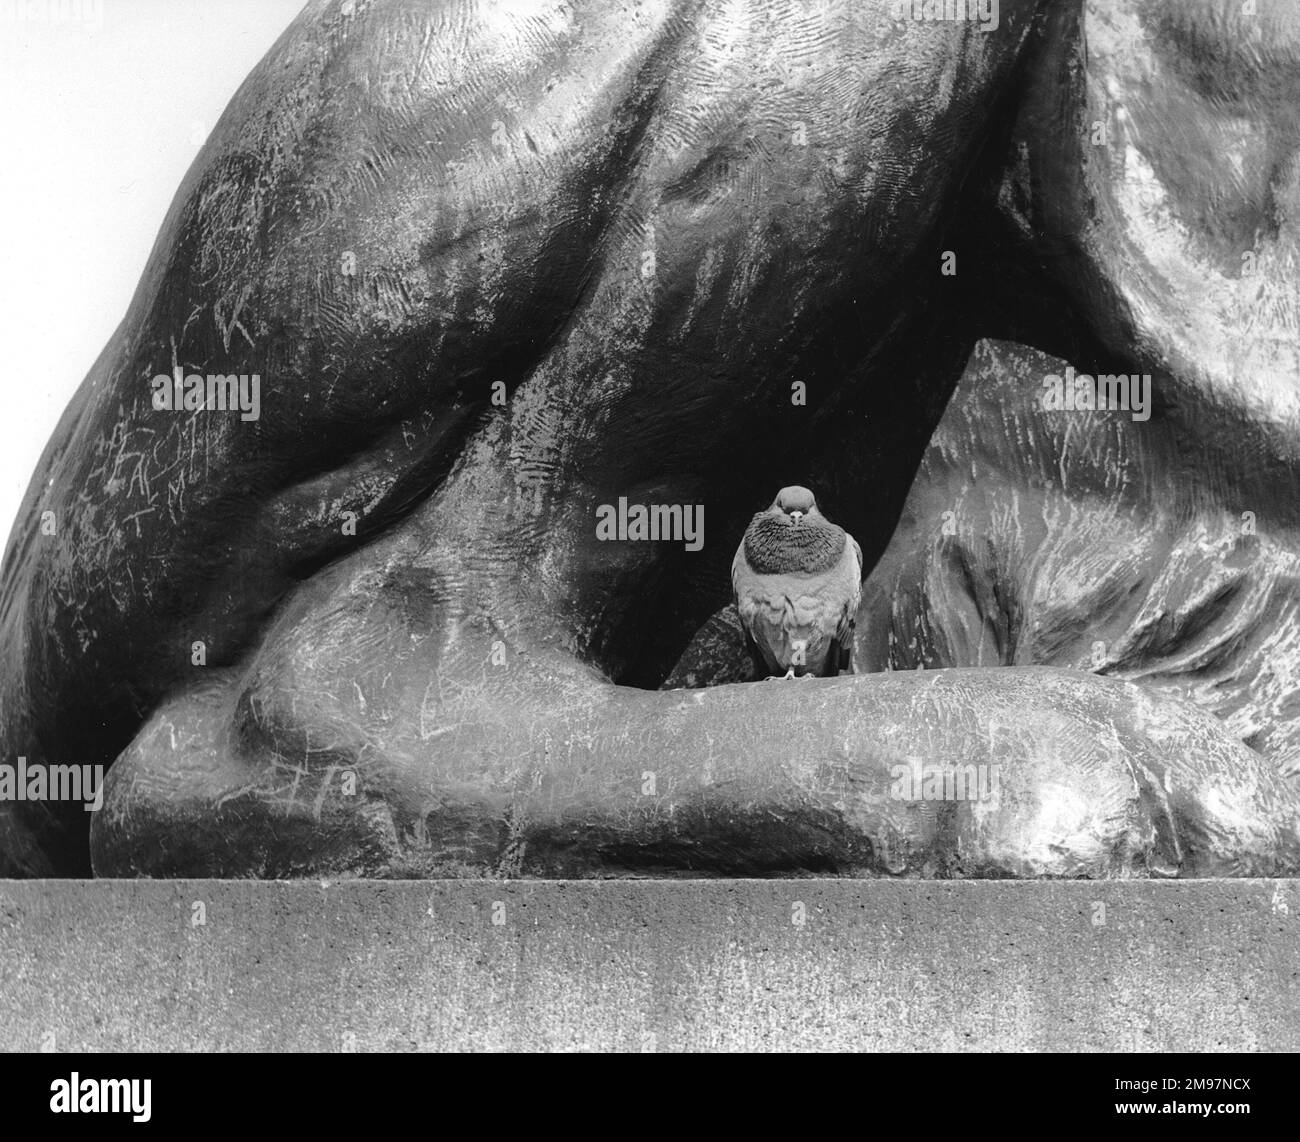 Pigeon having a rest on one of the lion statues, Trafagdar Square, London. Stock Photo